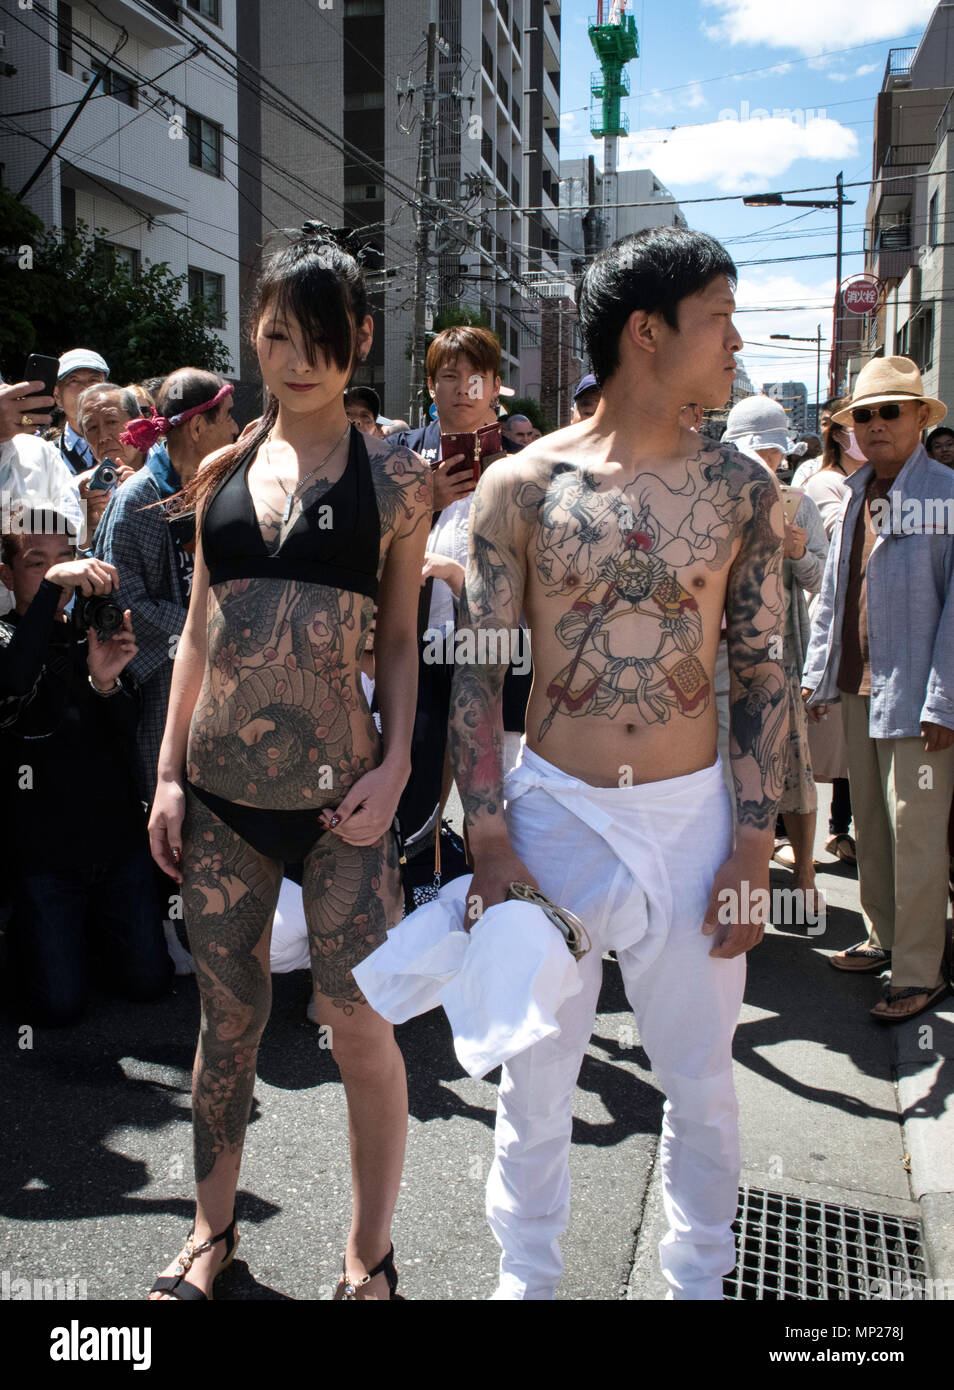 TOKYO, JAPAN - MAY 20: Heavily tattooed Japanese man and woman pose for photo during Tokyo's one of the largest three day festival called 'Sanja Matsuri' on the third and final day, May 20, 2018 in Tokyo, Japan. A boisterous traditional mikoshi (portable shrine) is carried in the streets of Asakusa to bring luck, blessings and prosperity to the area and its inhabitants. (Photo: Richard Atrero de Guzman/ Aflo) Stock Photo